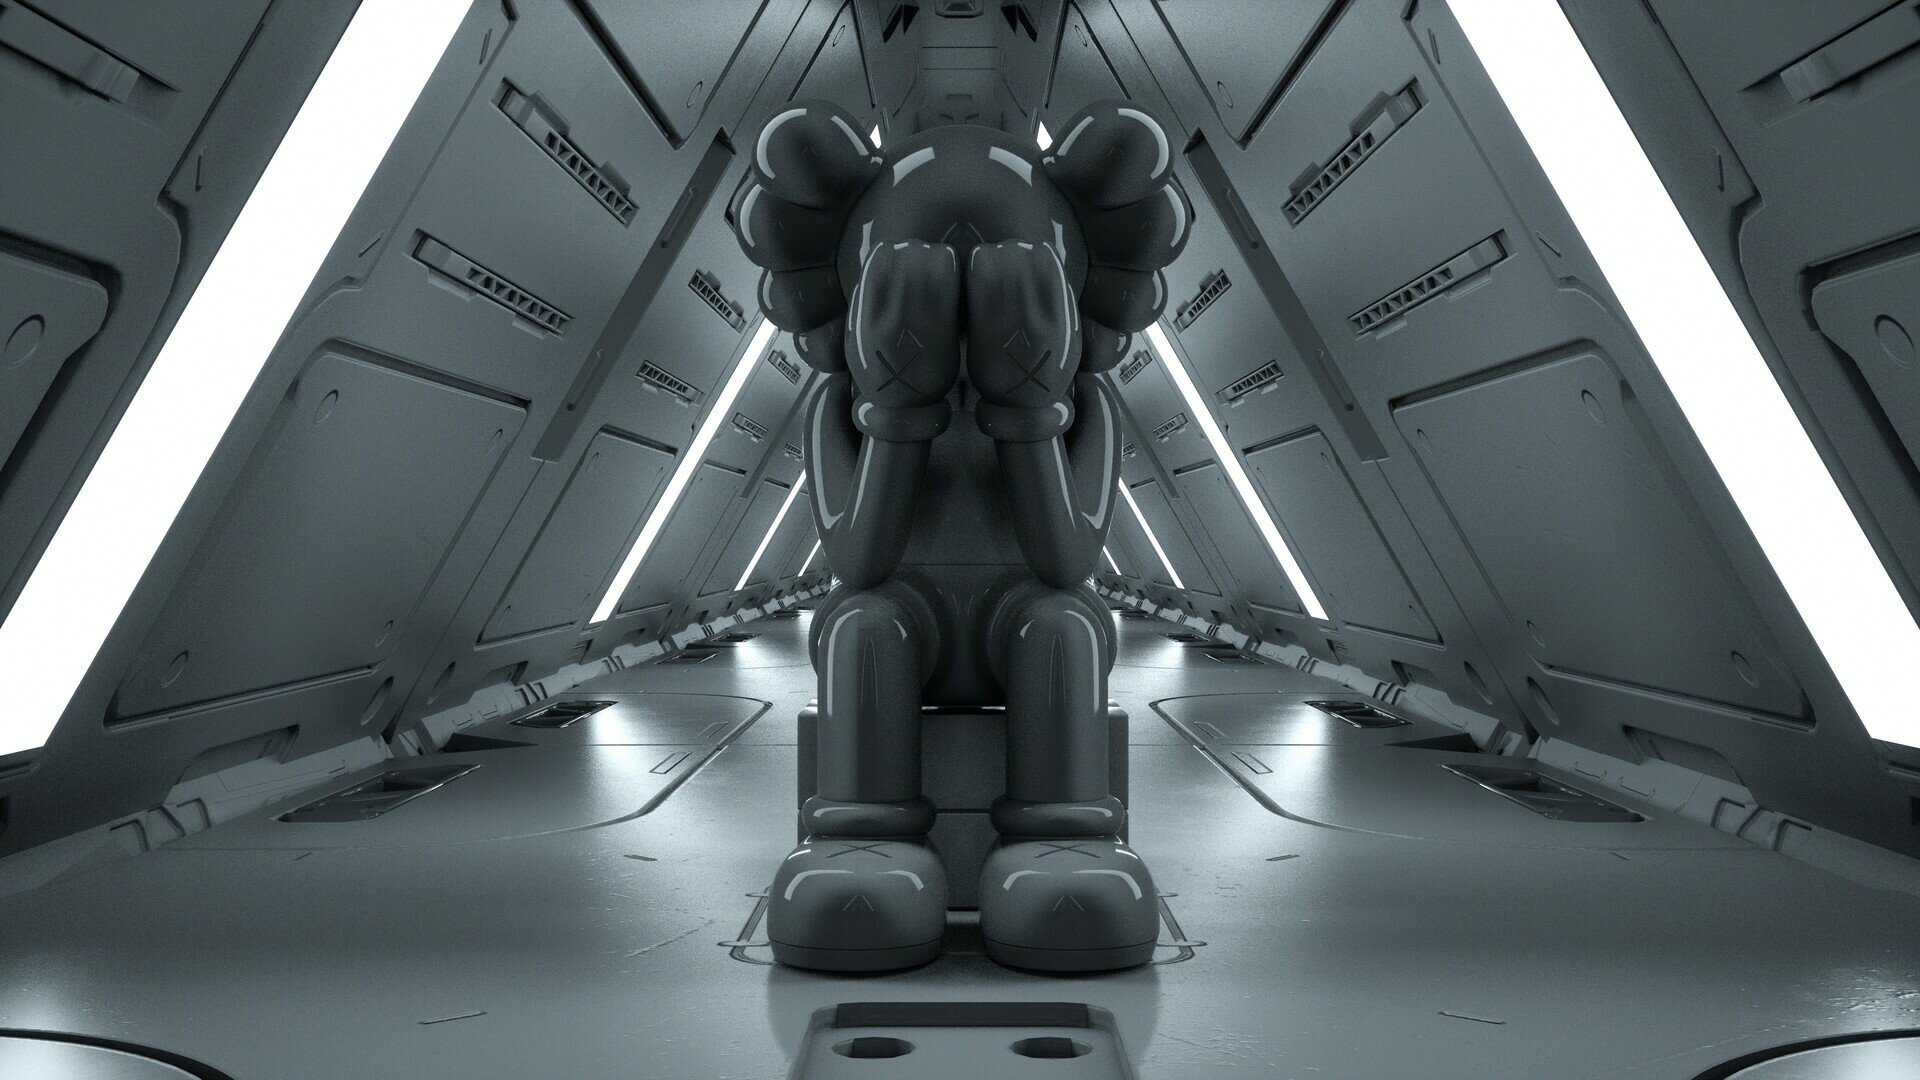 KAWS: Known for an ability to blur lines between commercial and fine art. 1920x1080 Full HD Wallpaper.